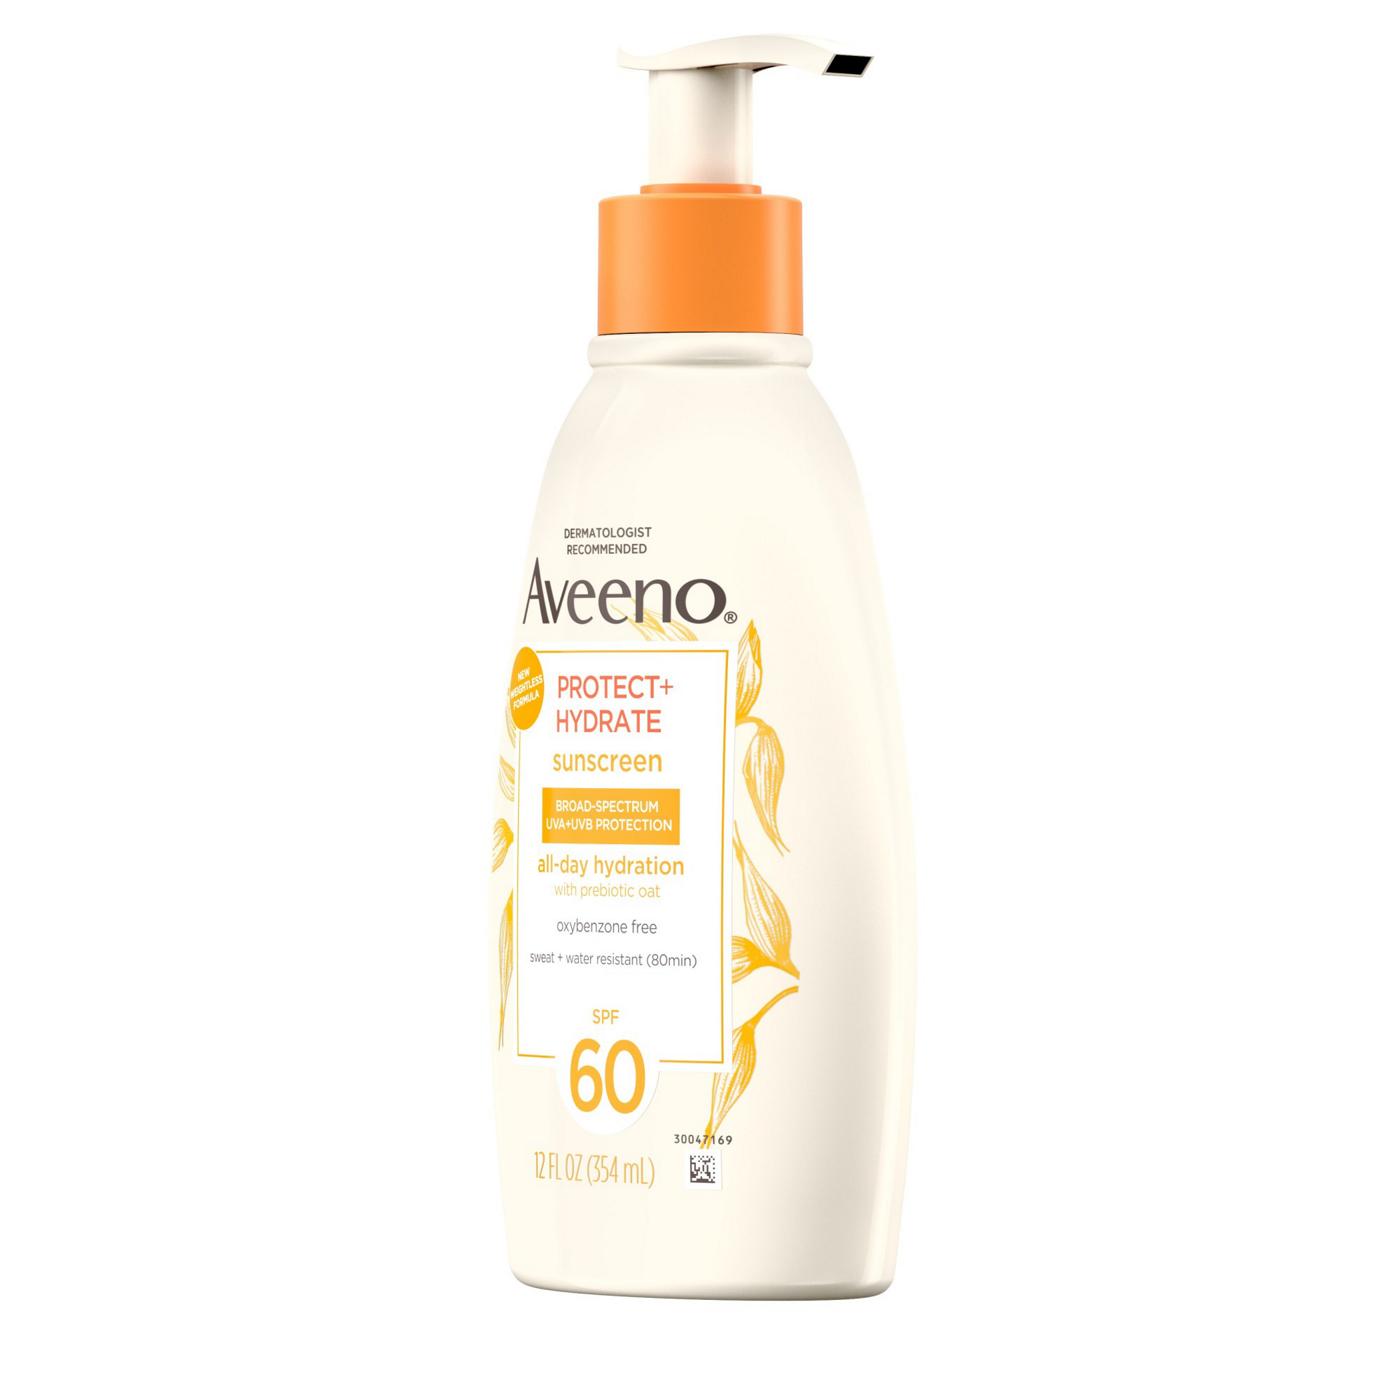 Aveeno Protect + Hydrate Sunscreen SPF 60; image 7 of 7